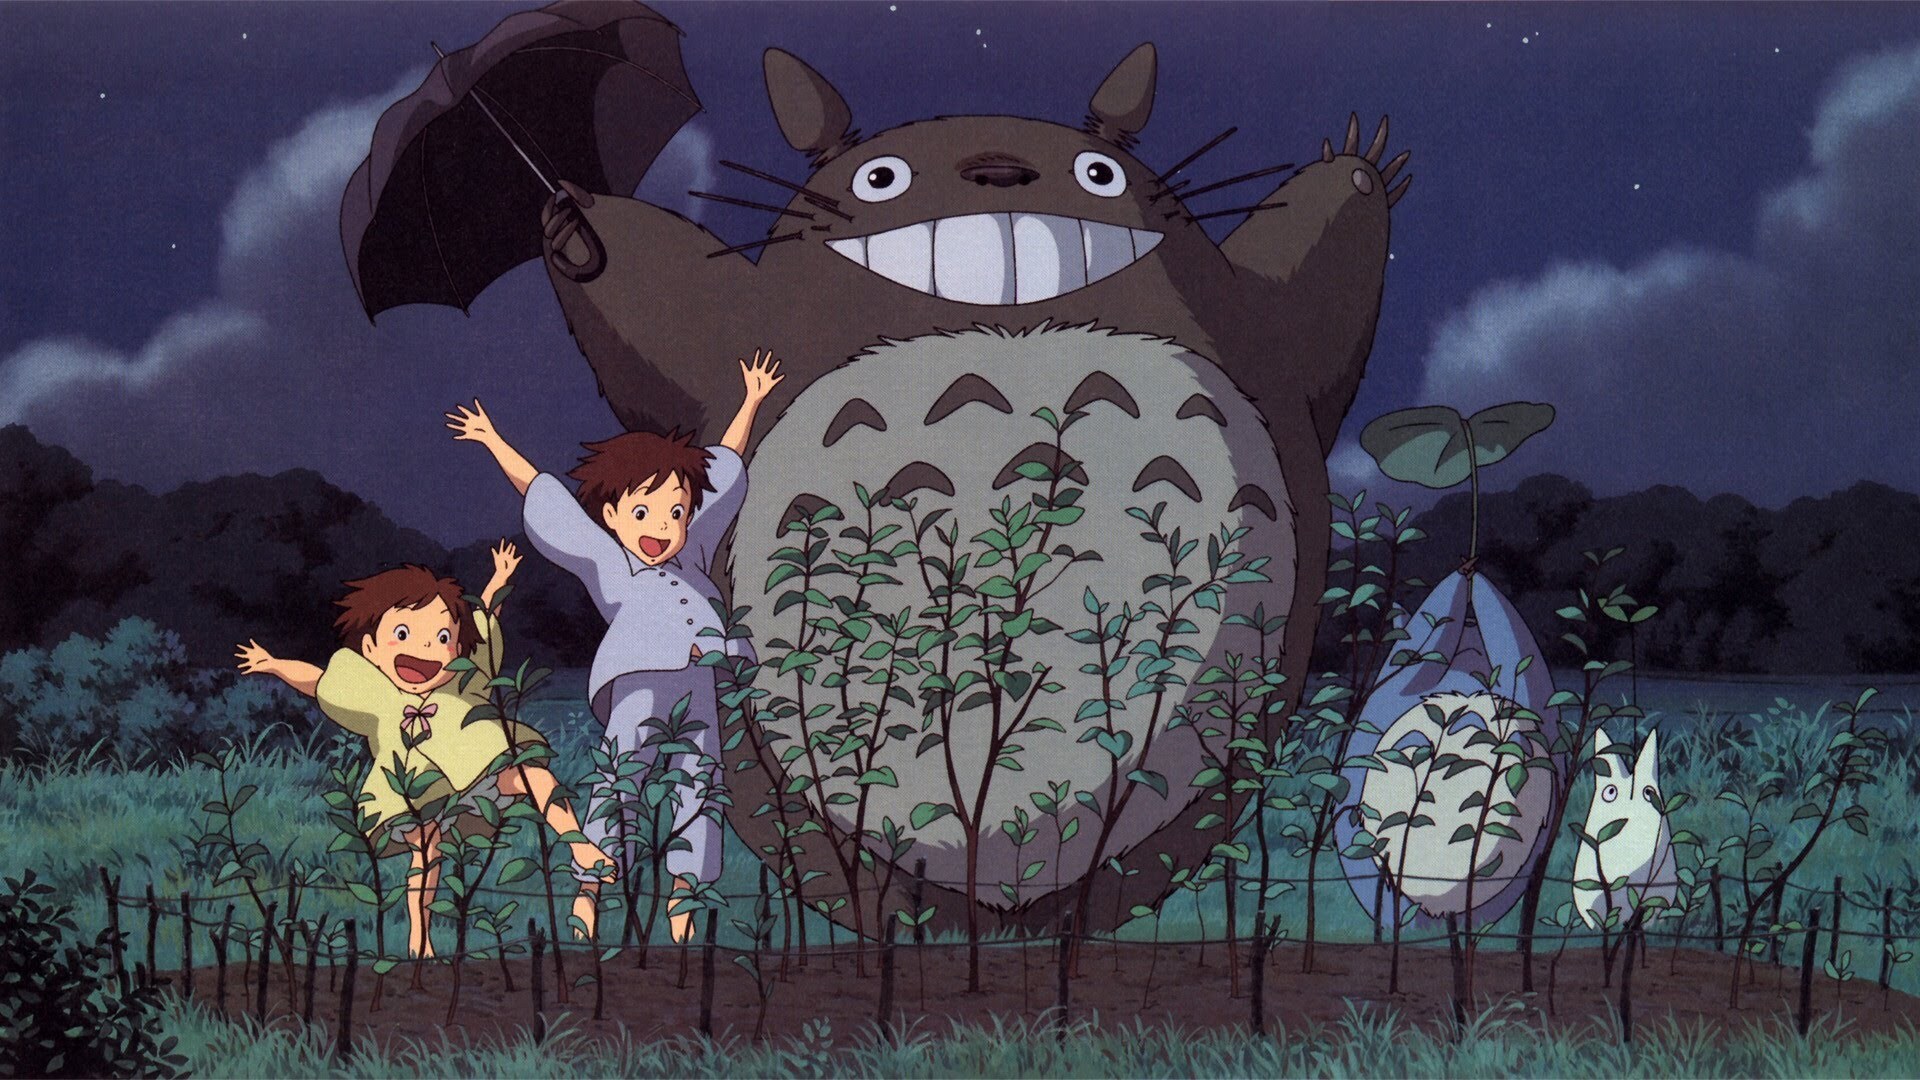 Totoro, two children, and two other forest creatures celebrating the plants they grew.